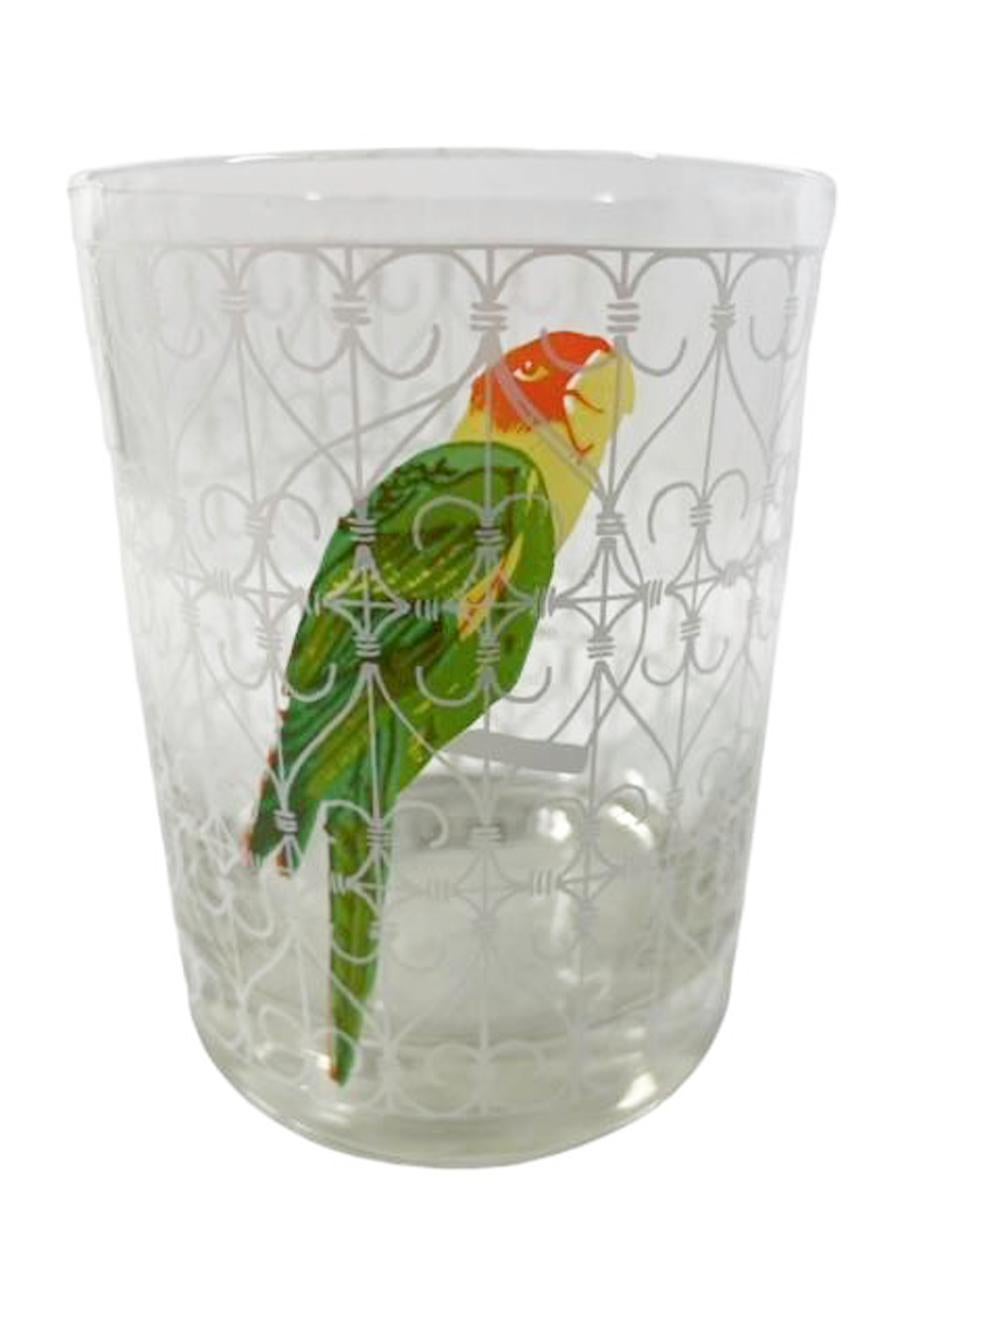 Set of six vintage rocks glasses by Cera Glassware decorated with a colorful parrot in a white scrollwork cage on clear glass.